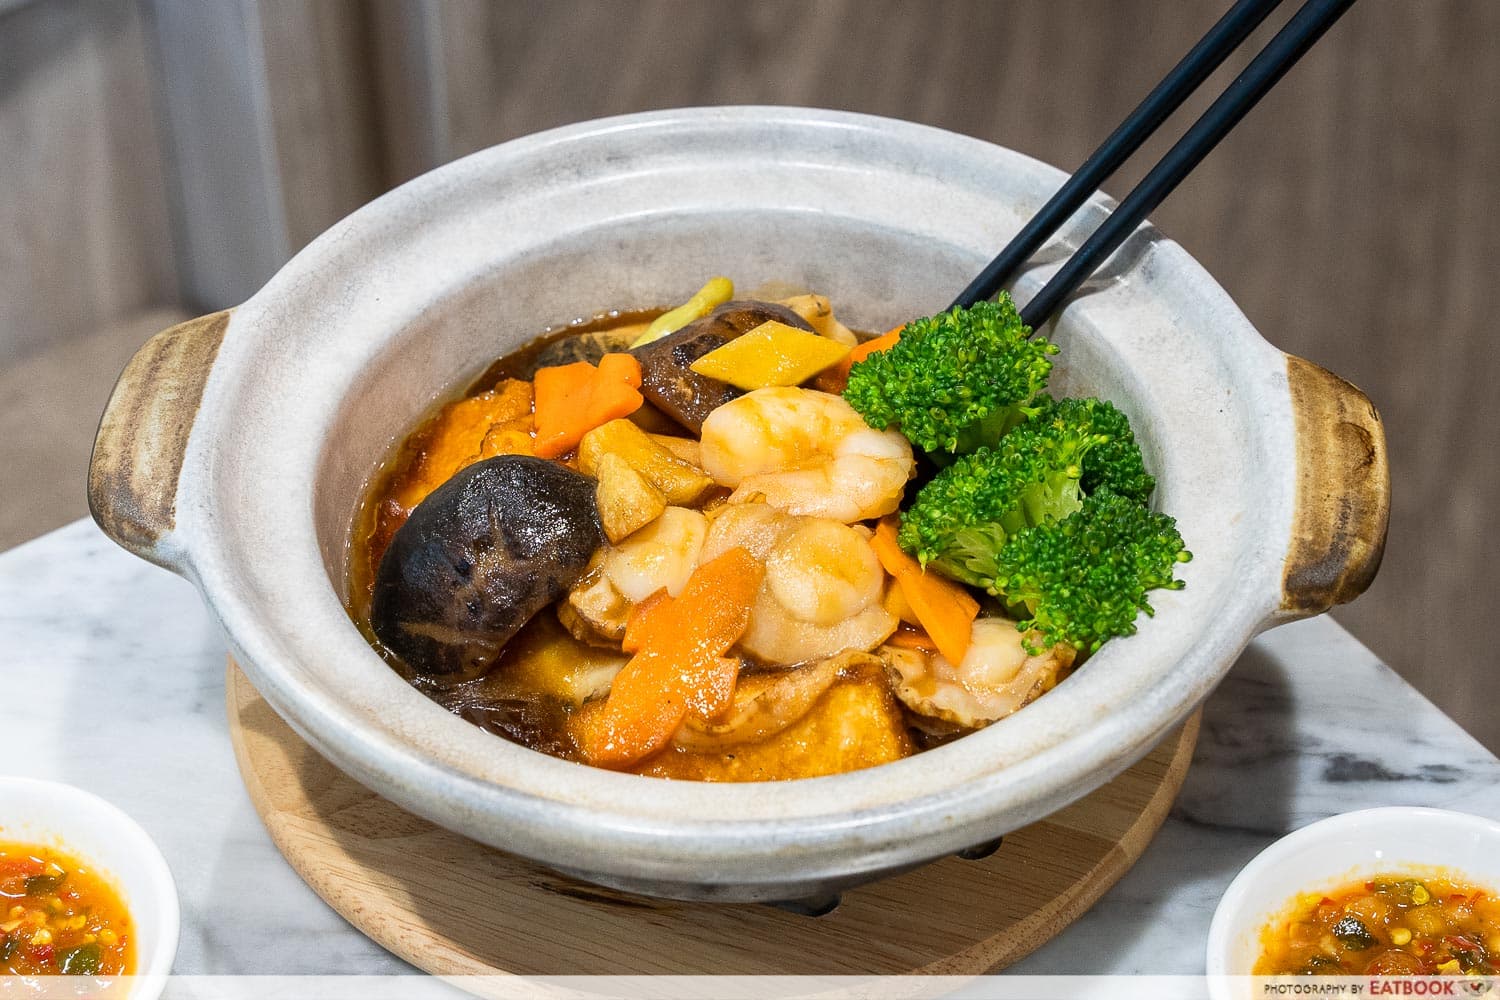 Braised Seafood with Homemade Bean Curd Claypot